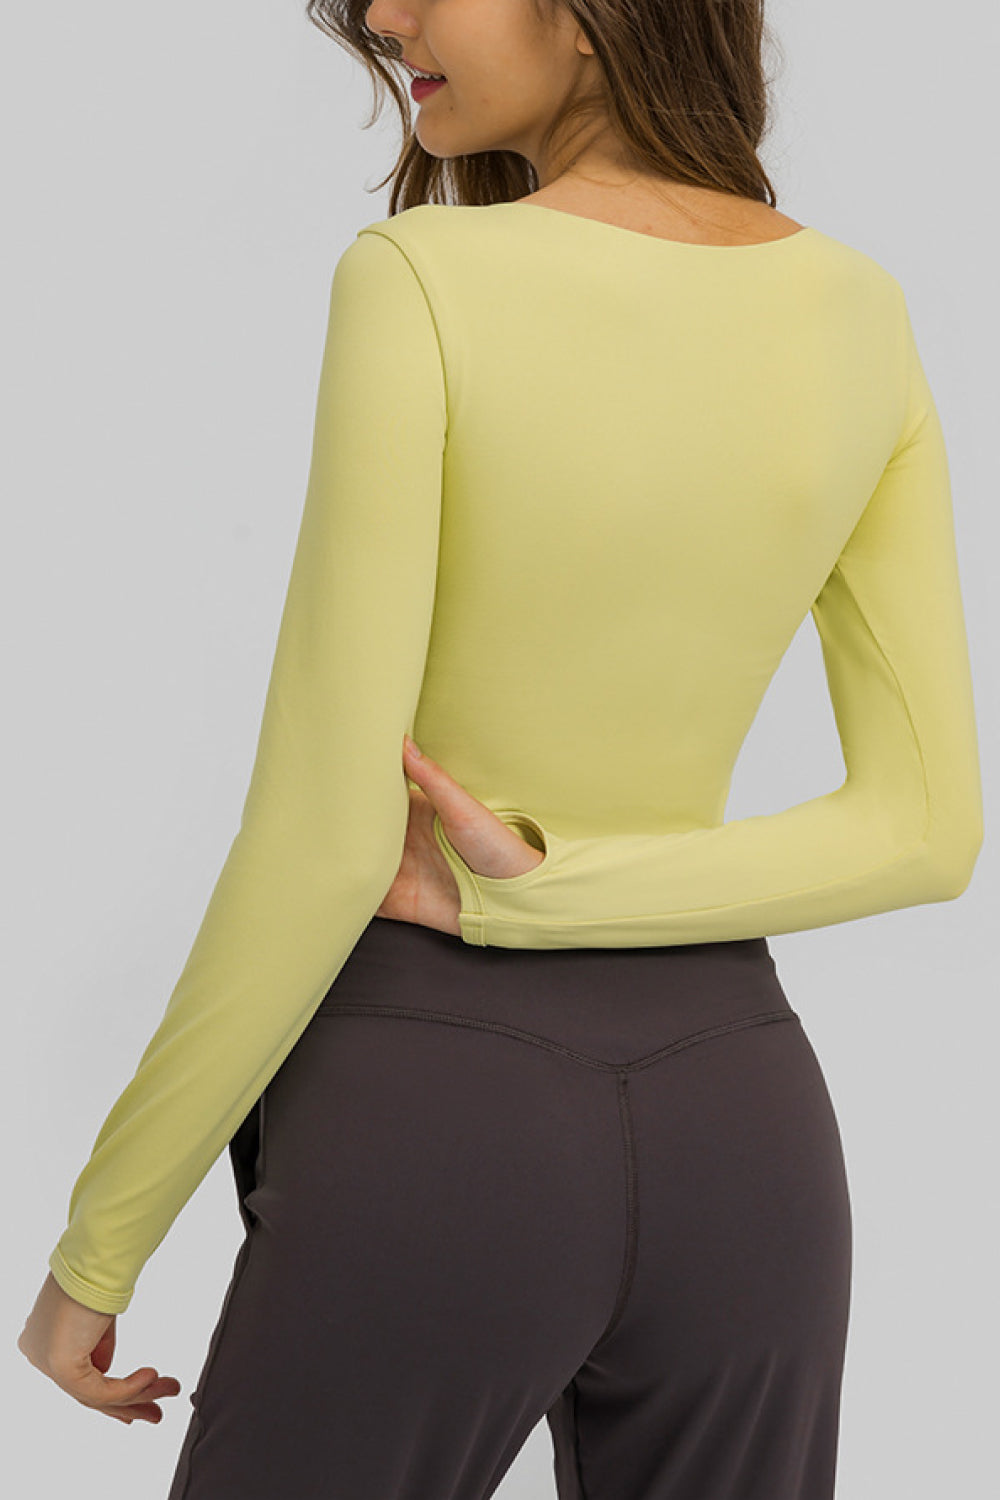 Long Sleeve High-impact Athletic Cut-out Cropped Sports Top